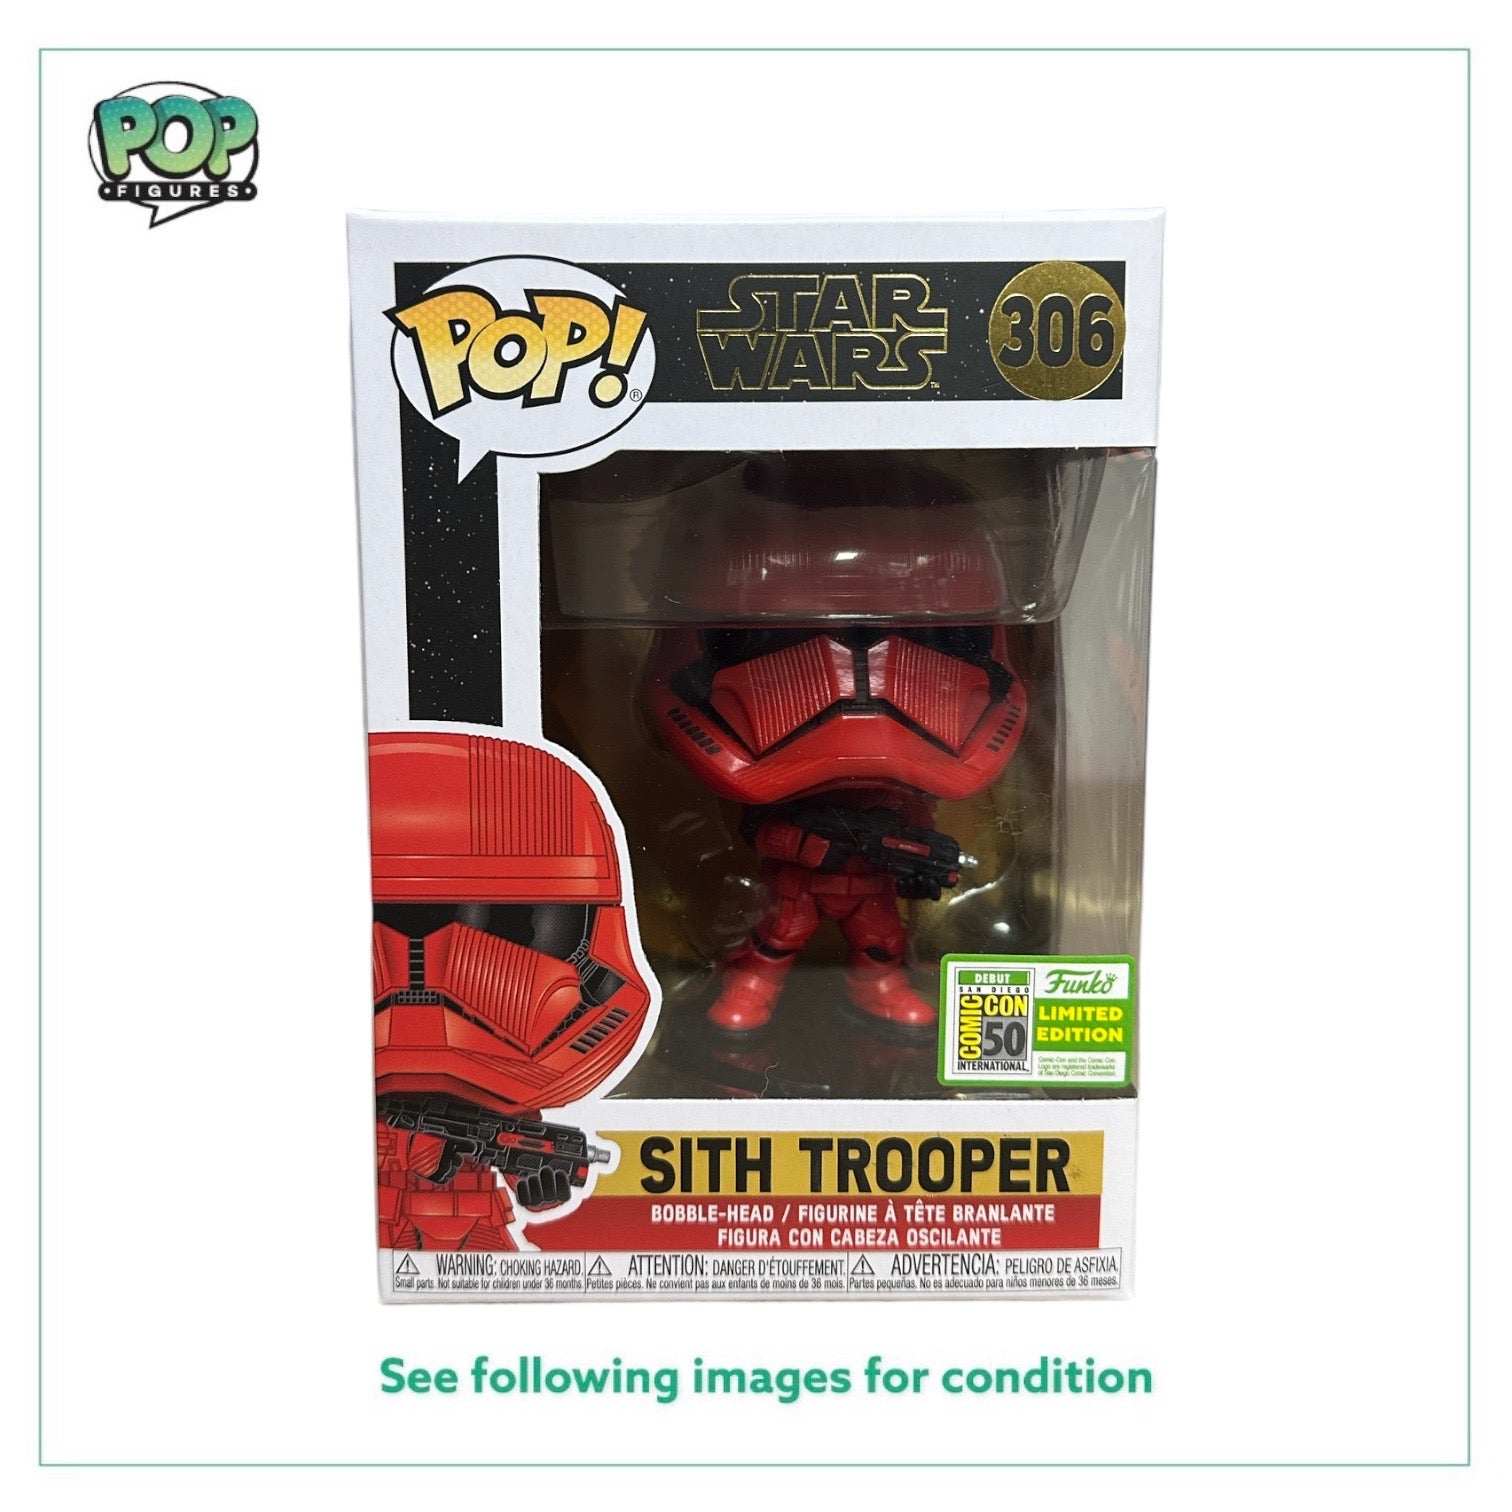 Sith Trooper #306 Funko Pop! - Star Wars - SDCC 2019 Debut Exclusive - Condition 9/10